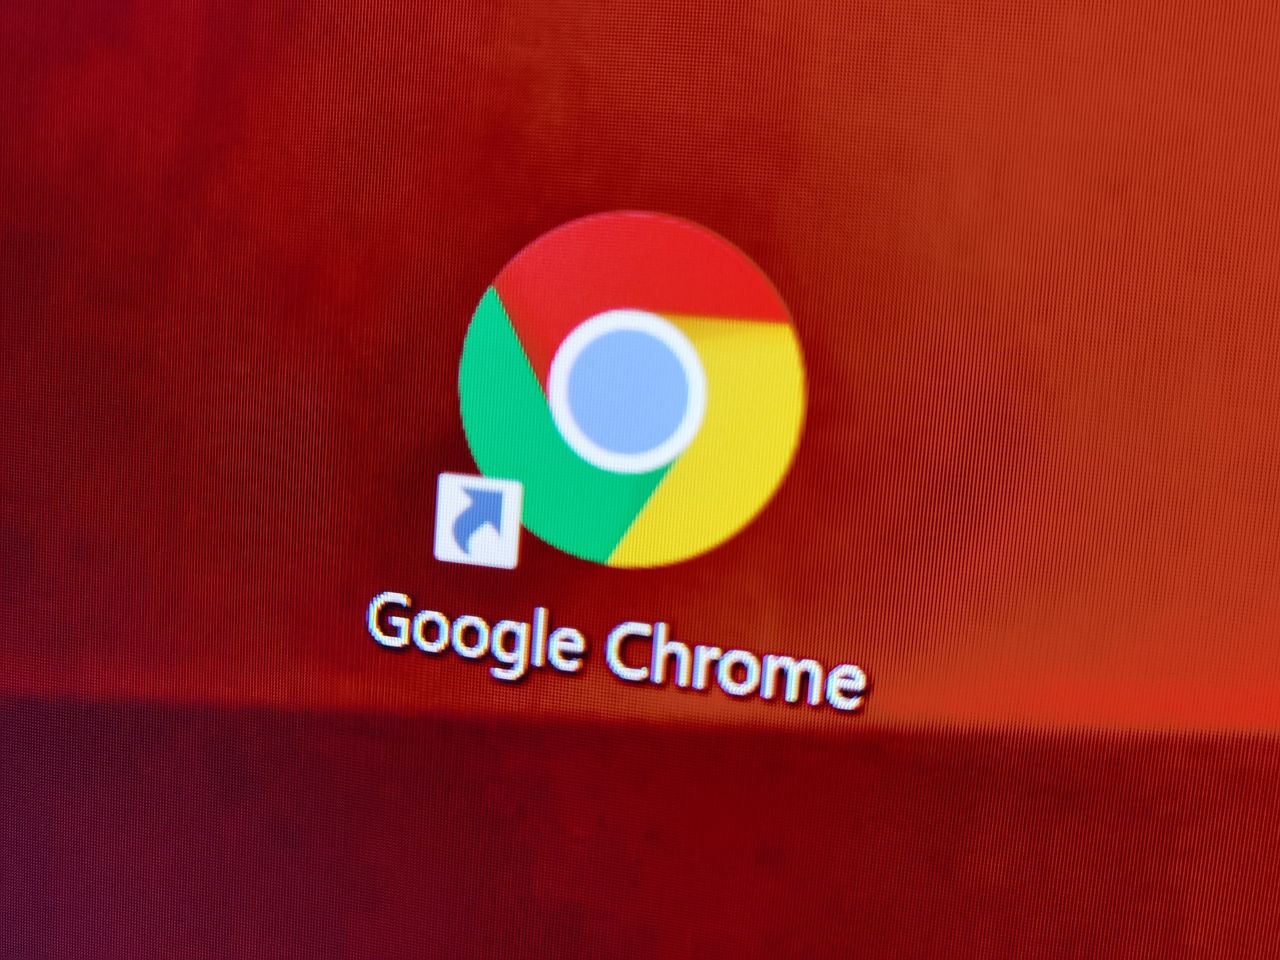 Google Chrome 118 available for download. Be sure to update